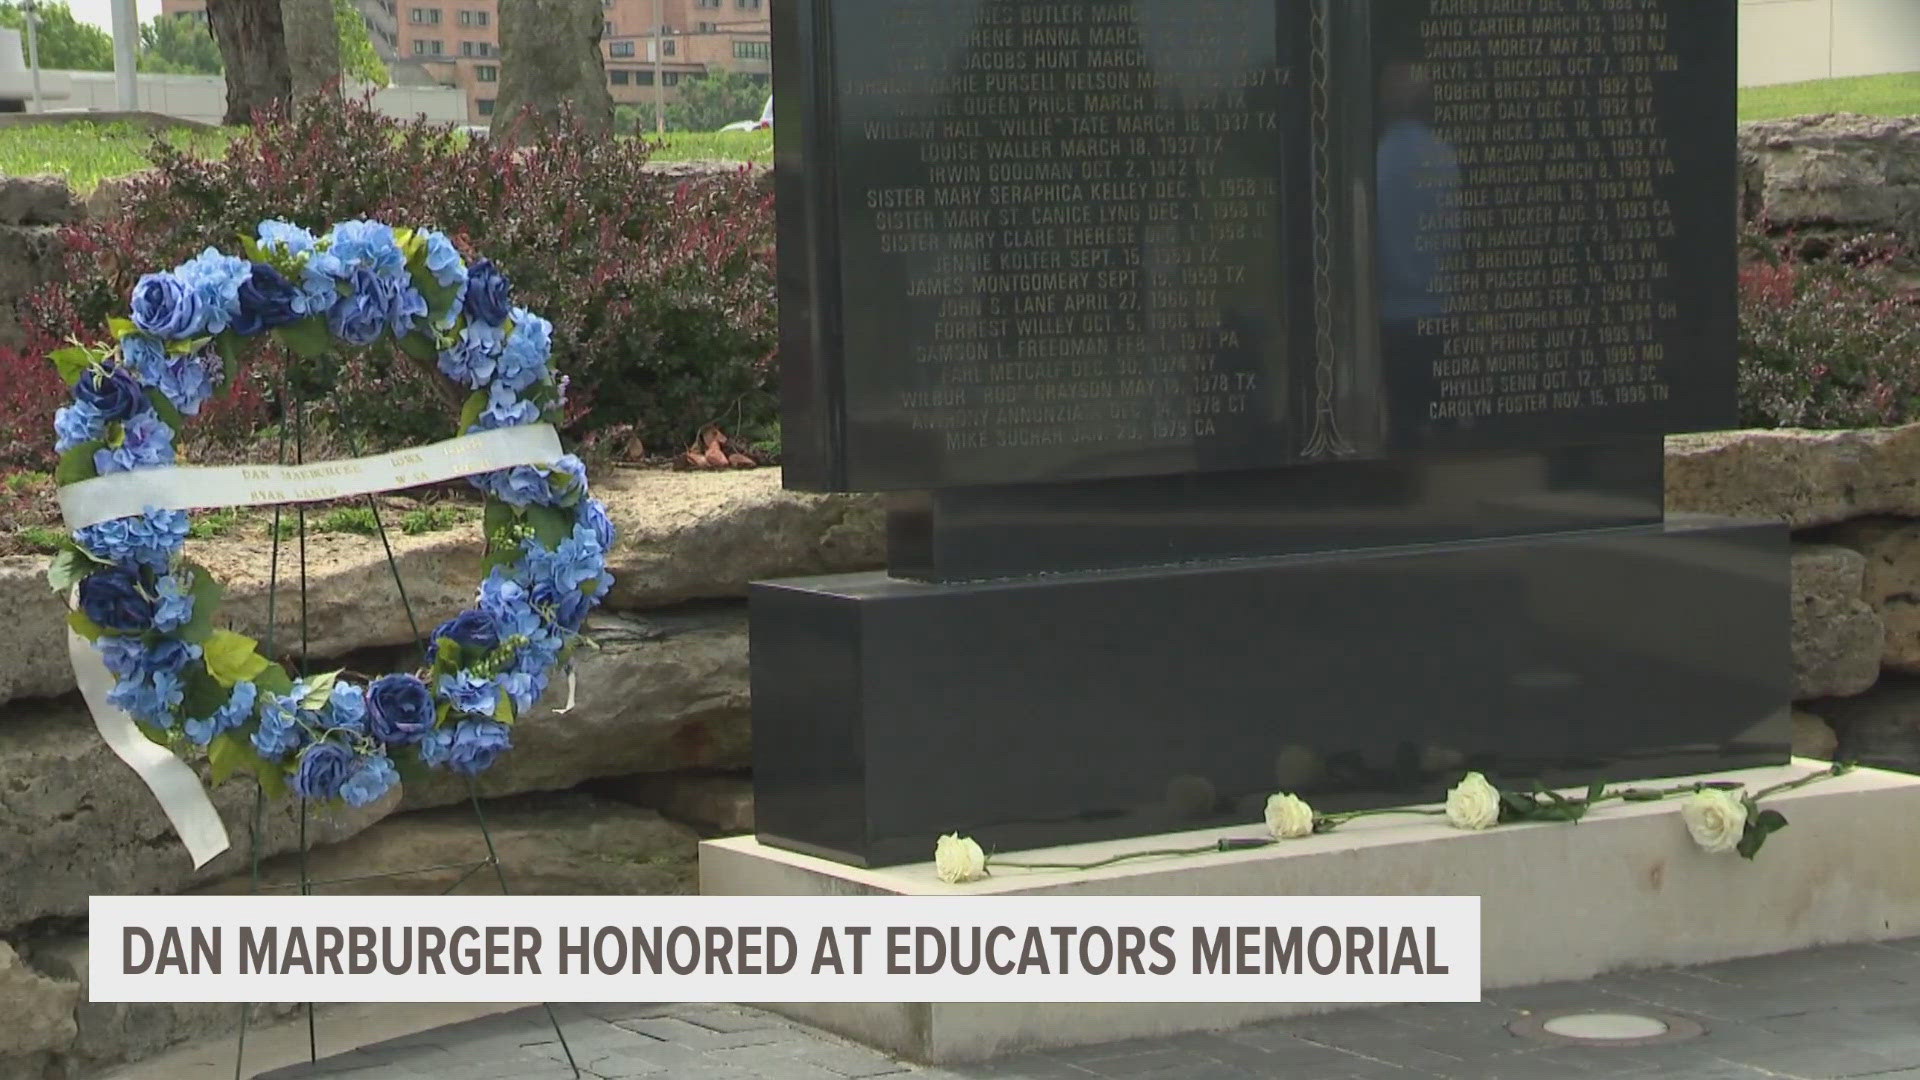 Connor O'Neal reports from Kansas on the memorial for Dan Marburger